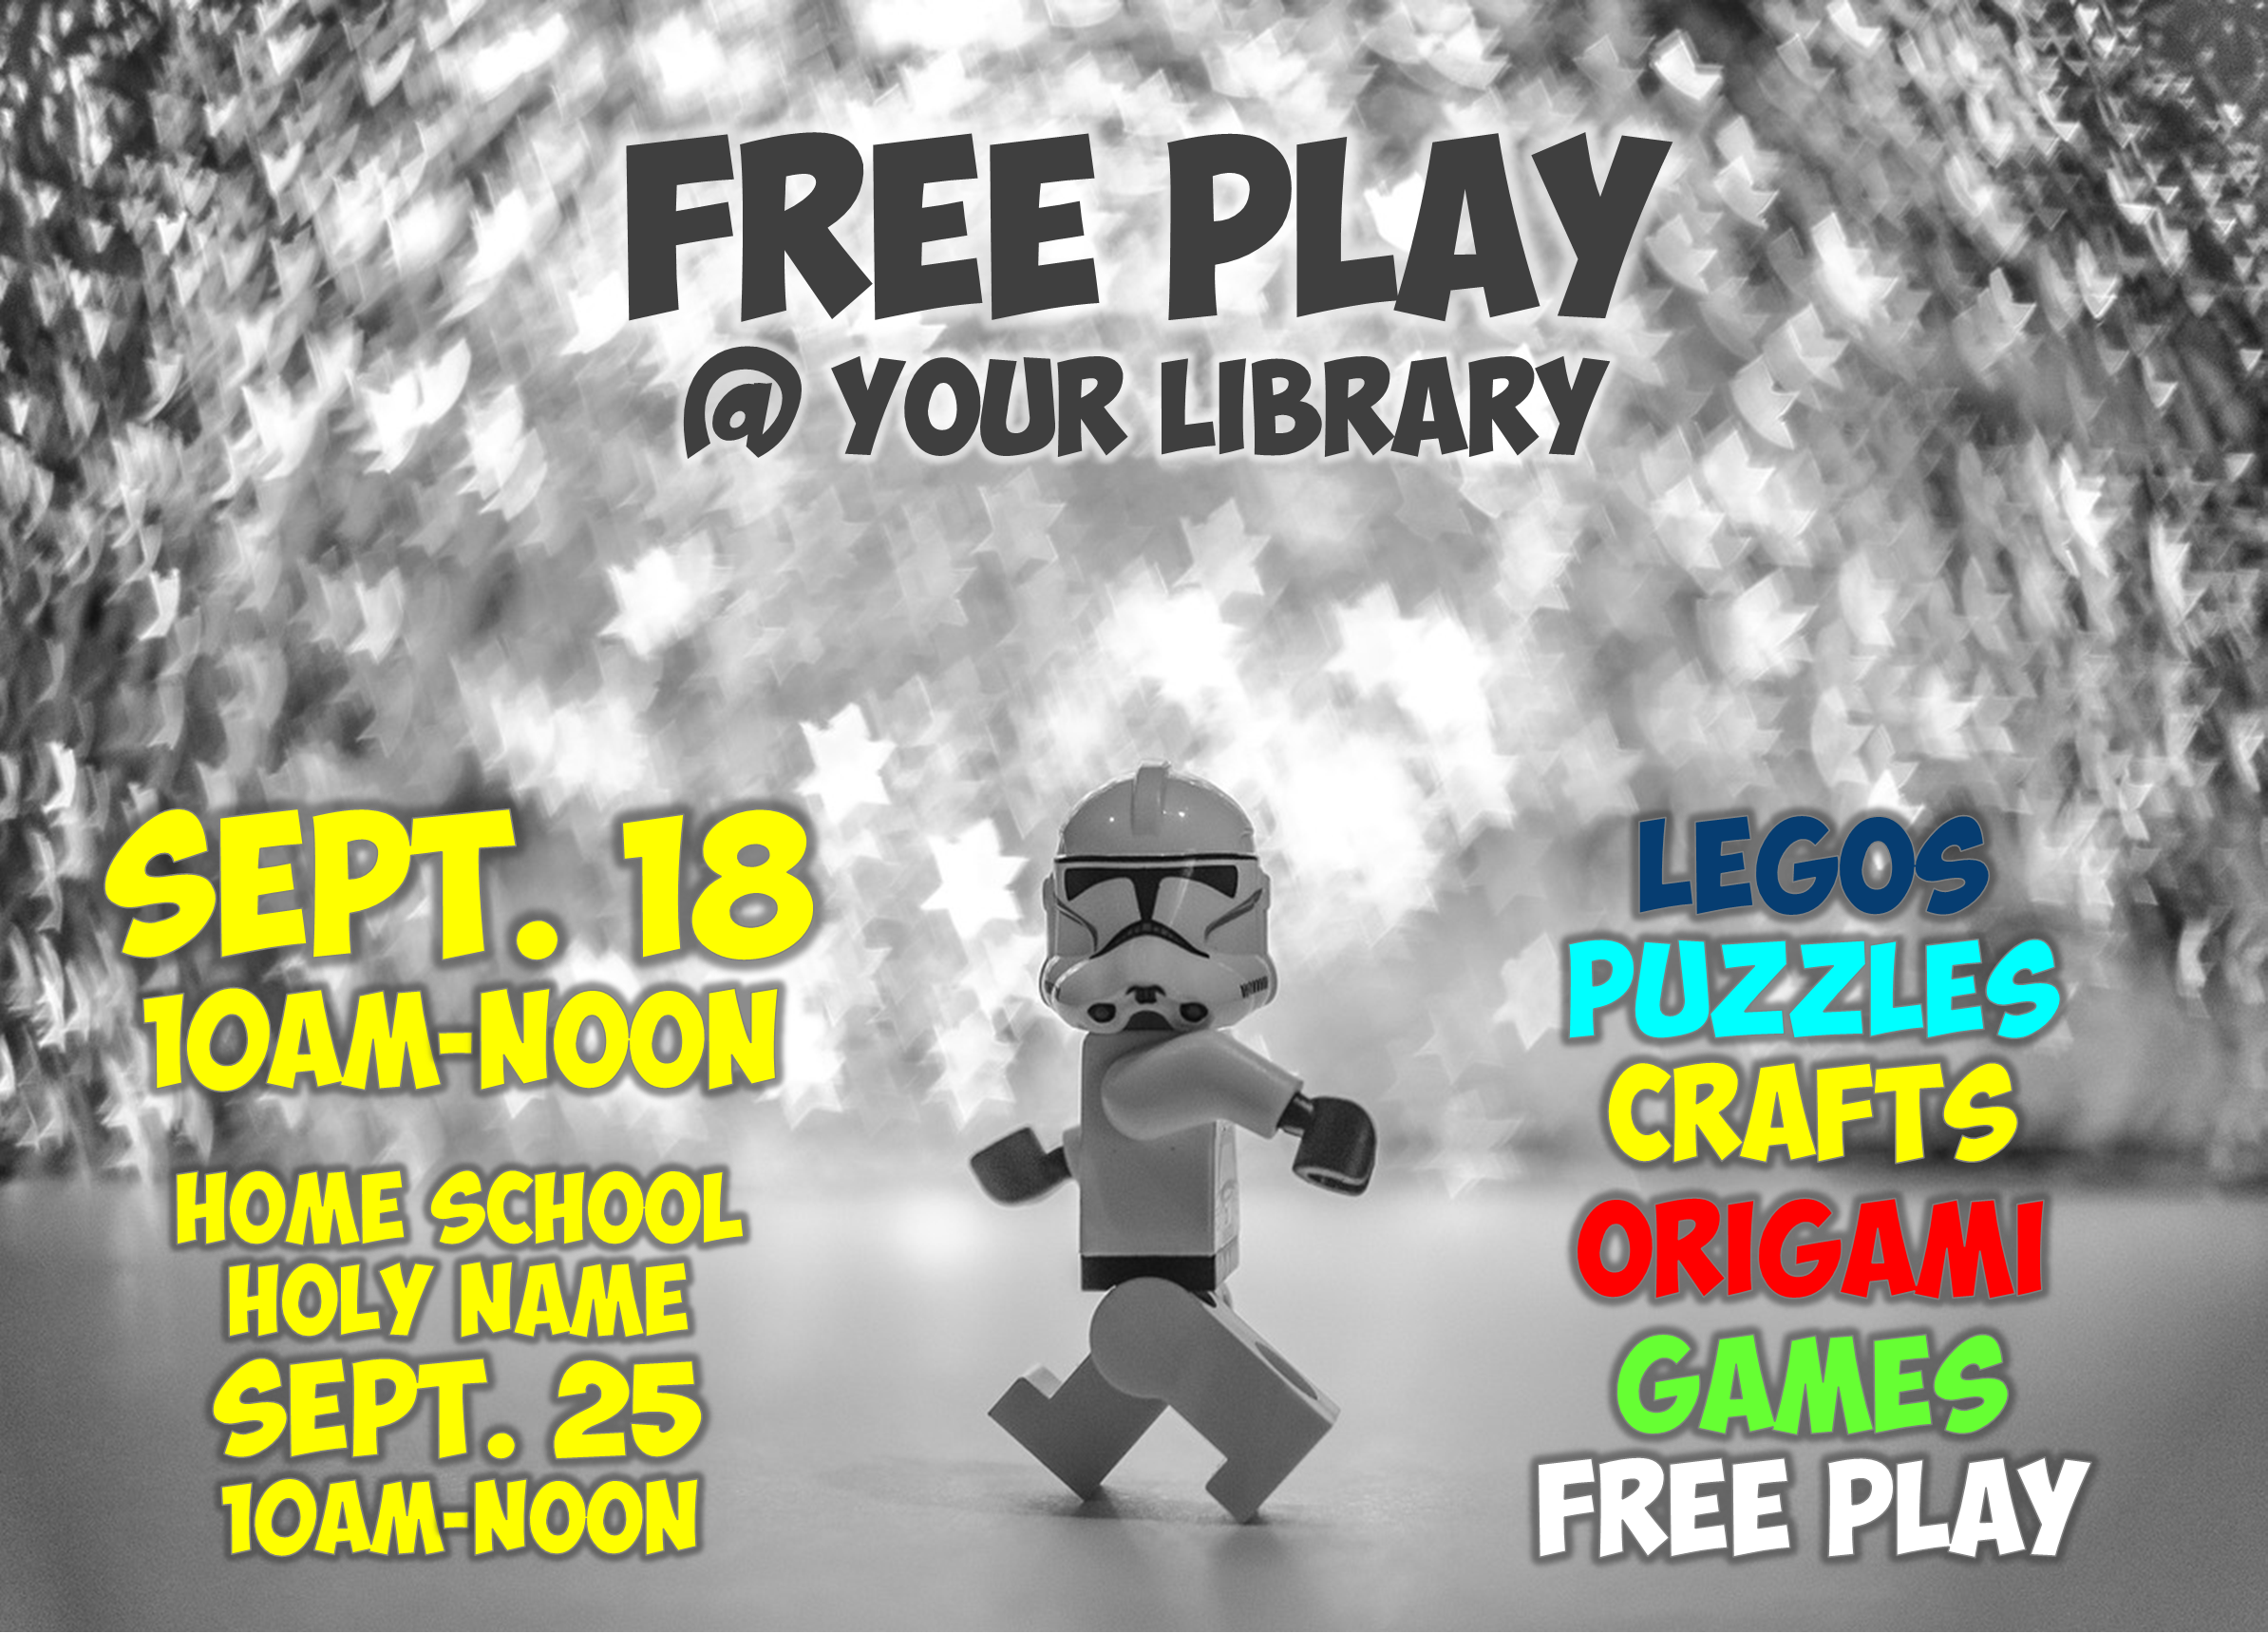 image is a LEGO stormtrooper walking (to the library we hope!)